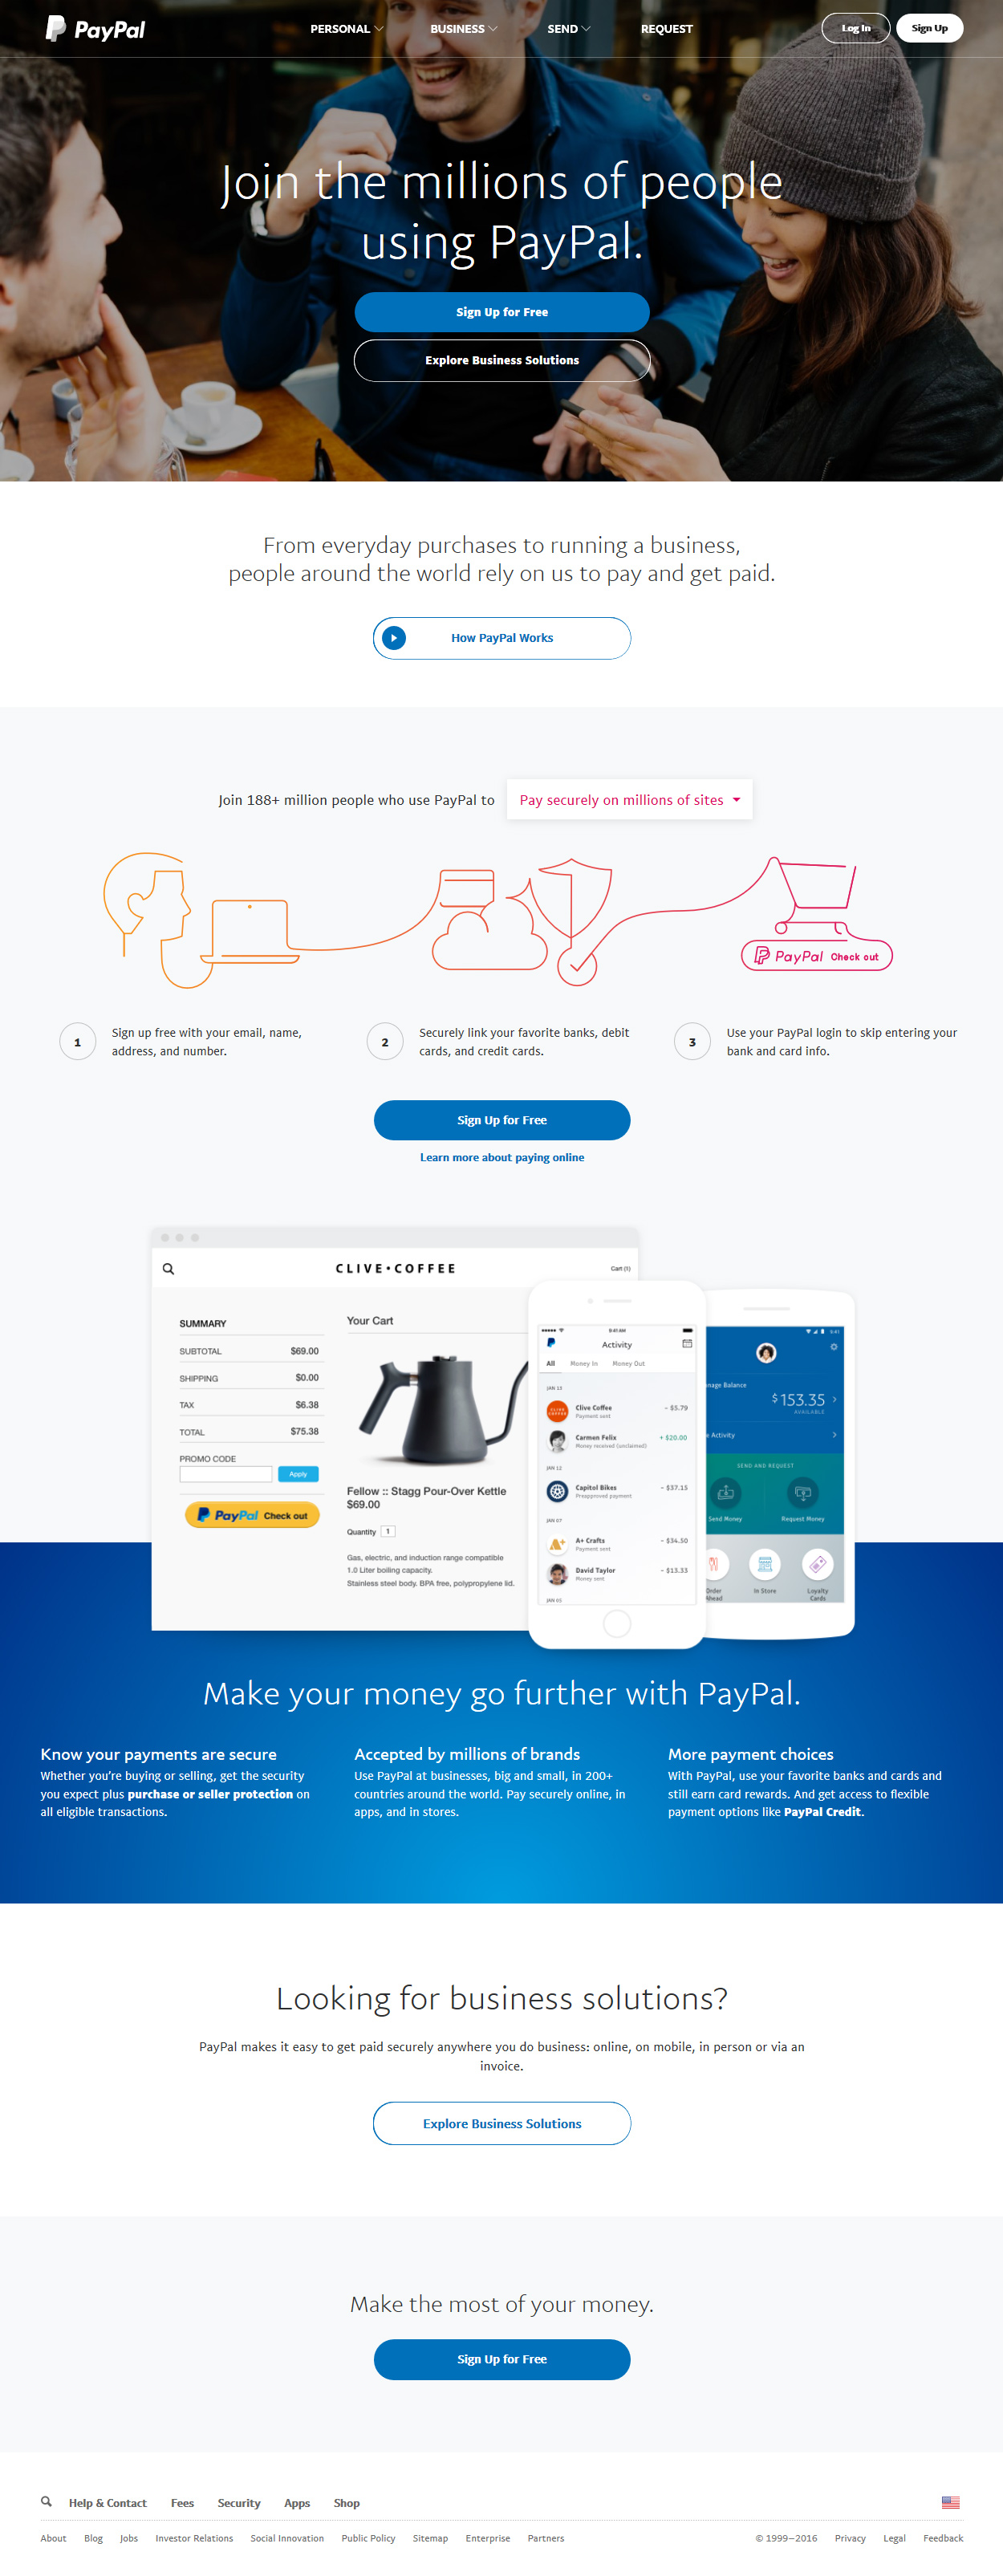 PayPal website in 2016